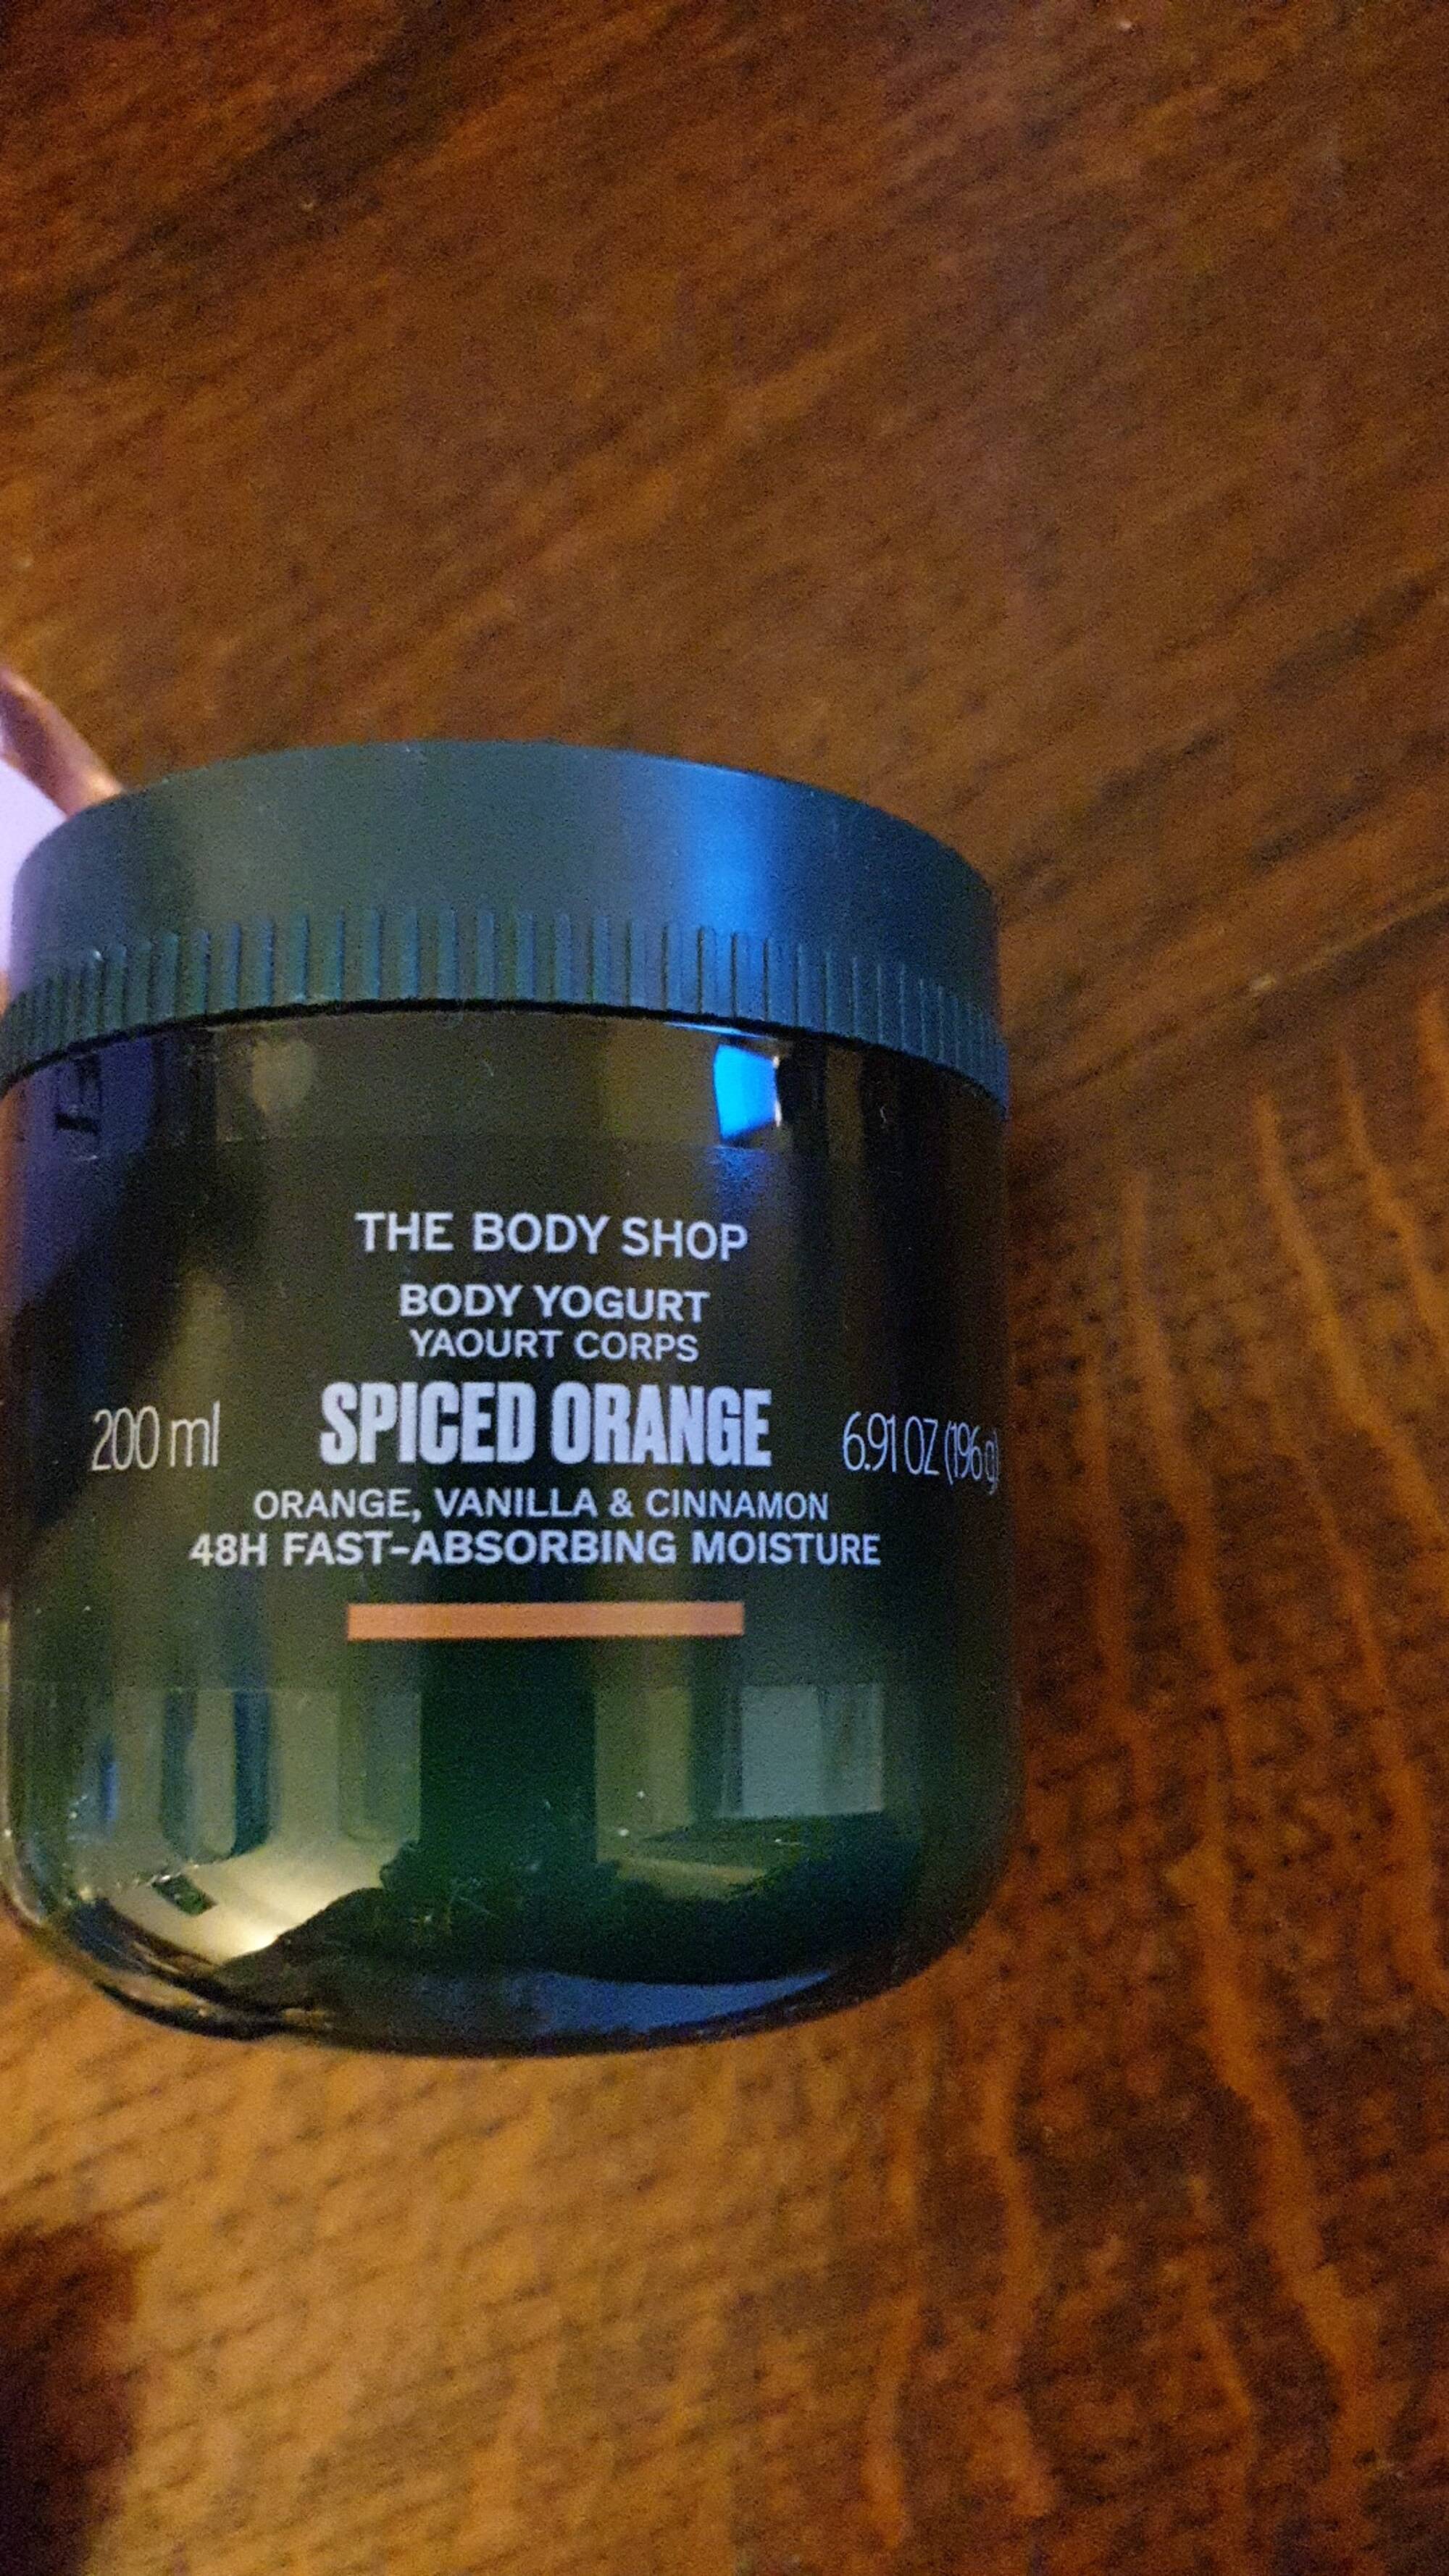 THE BODY SHOP - Spiced orange - Yaourt corps